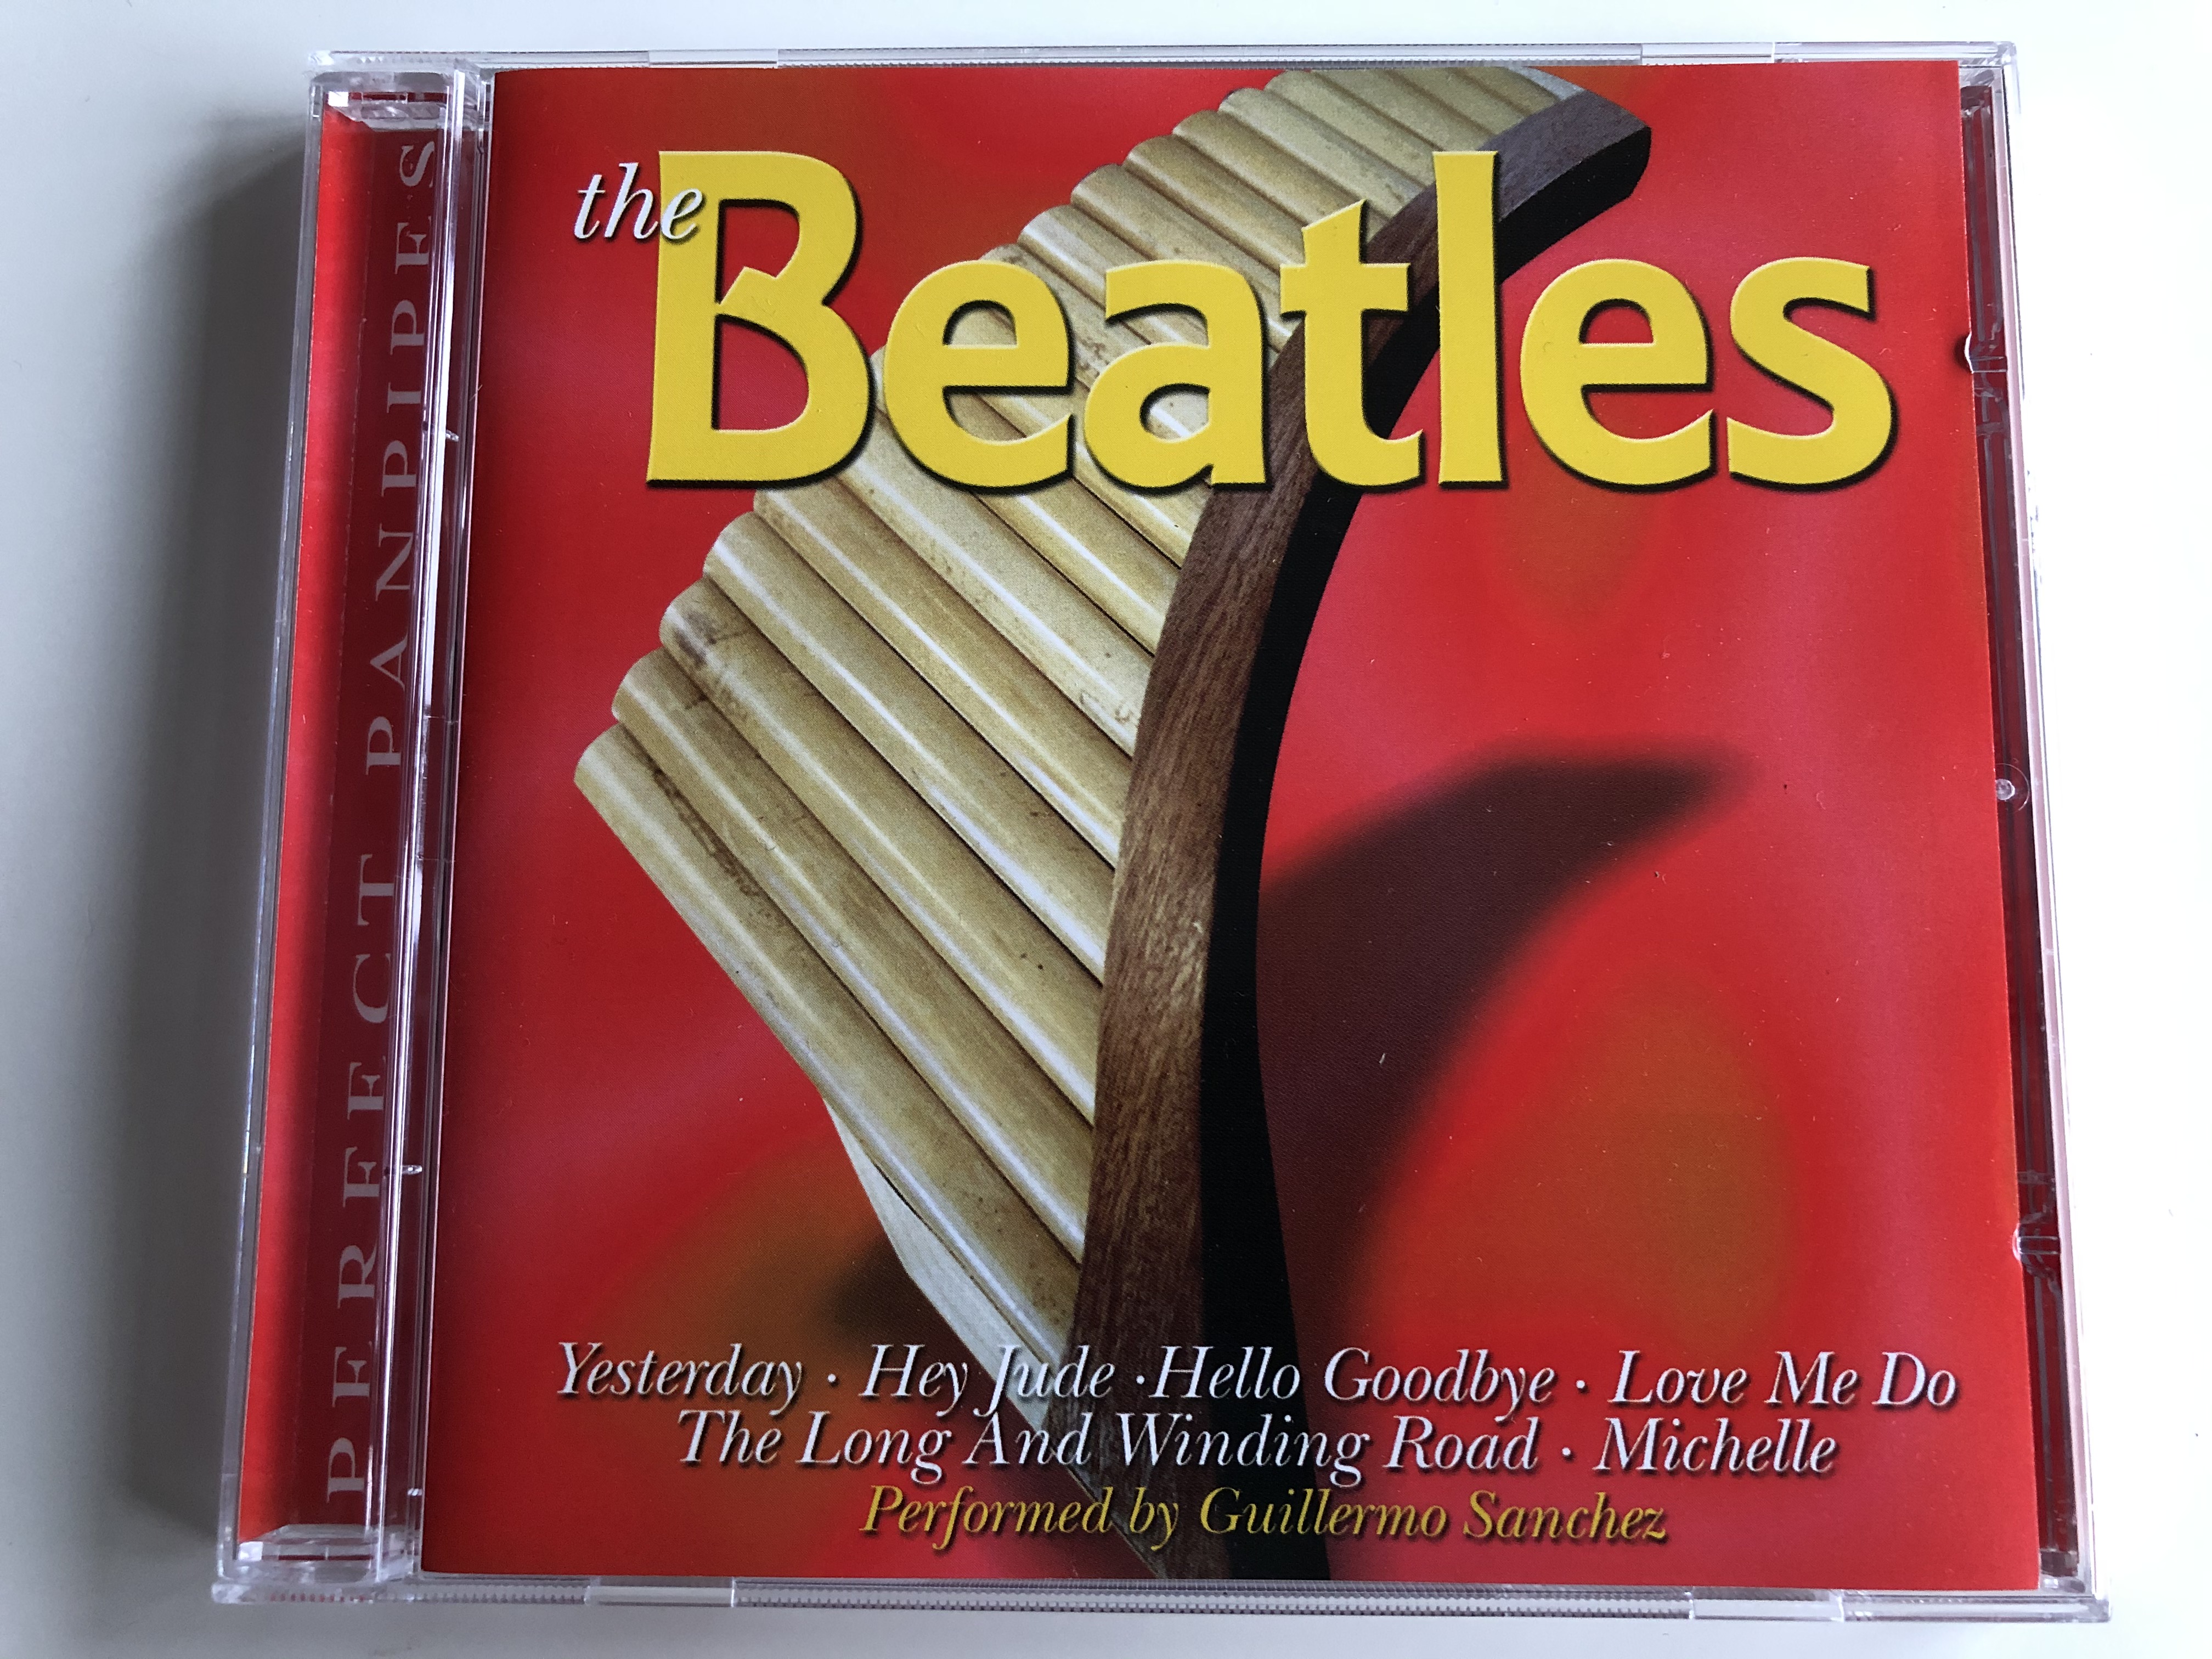 the-beatles-performed-by-guillermo-sanchez-yesterday-hey-jude-hello-goodbye-love-me-do-the-long-and-winding-road-michelle-perfect-panpipes-audio-cd-2001-3111-2-1-.jpg